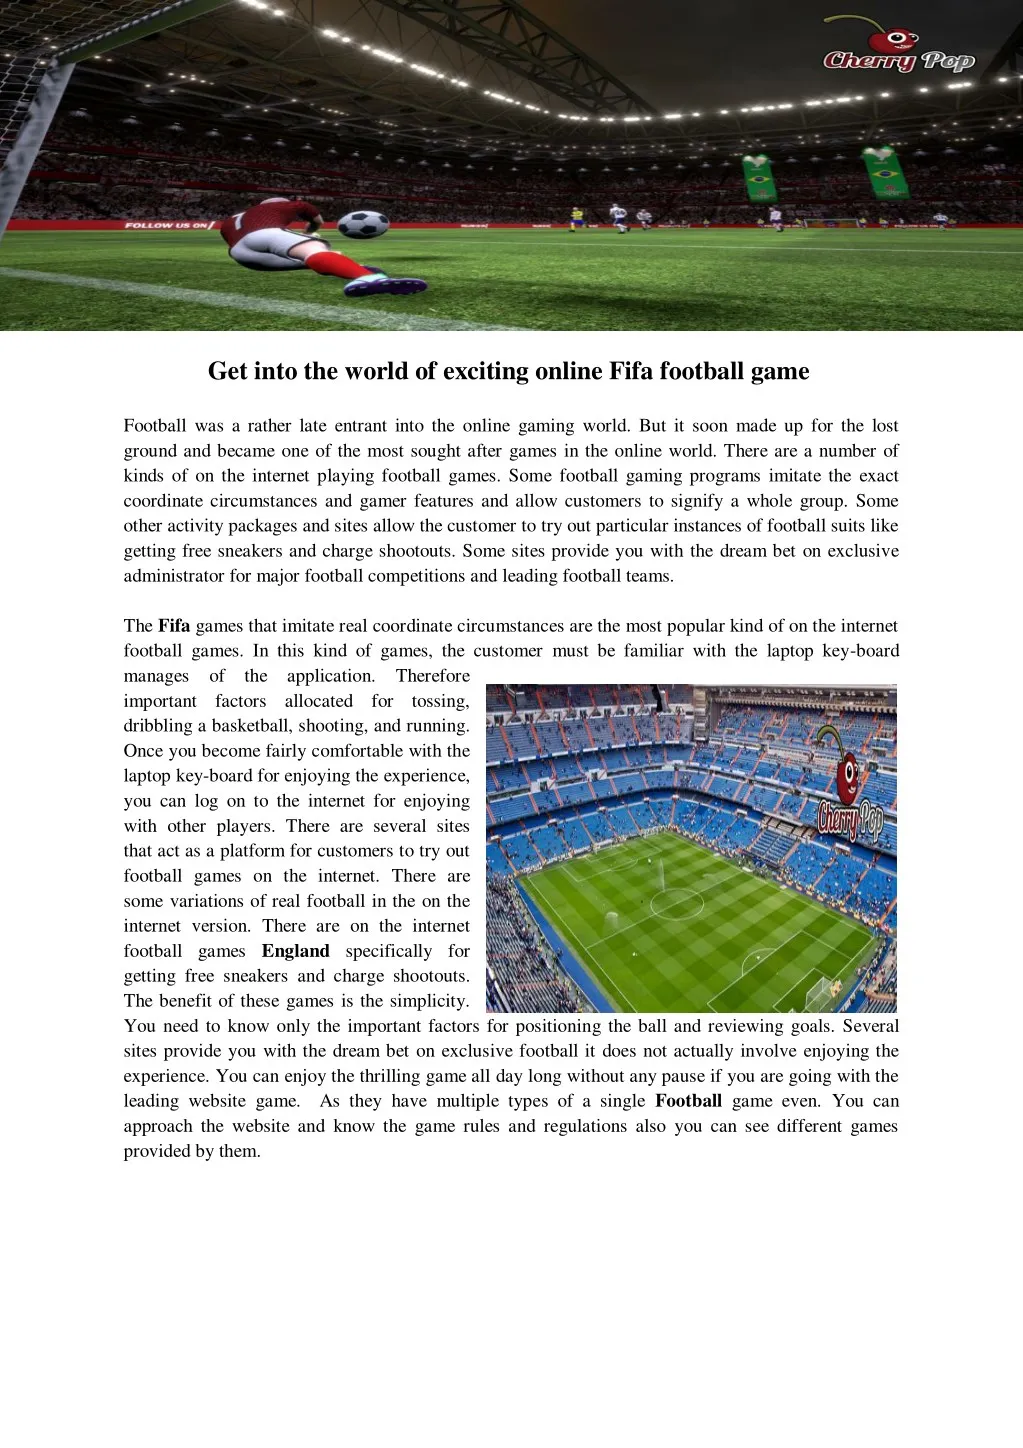 get into the world of exciting online fifa